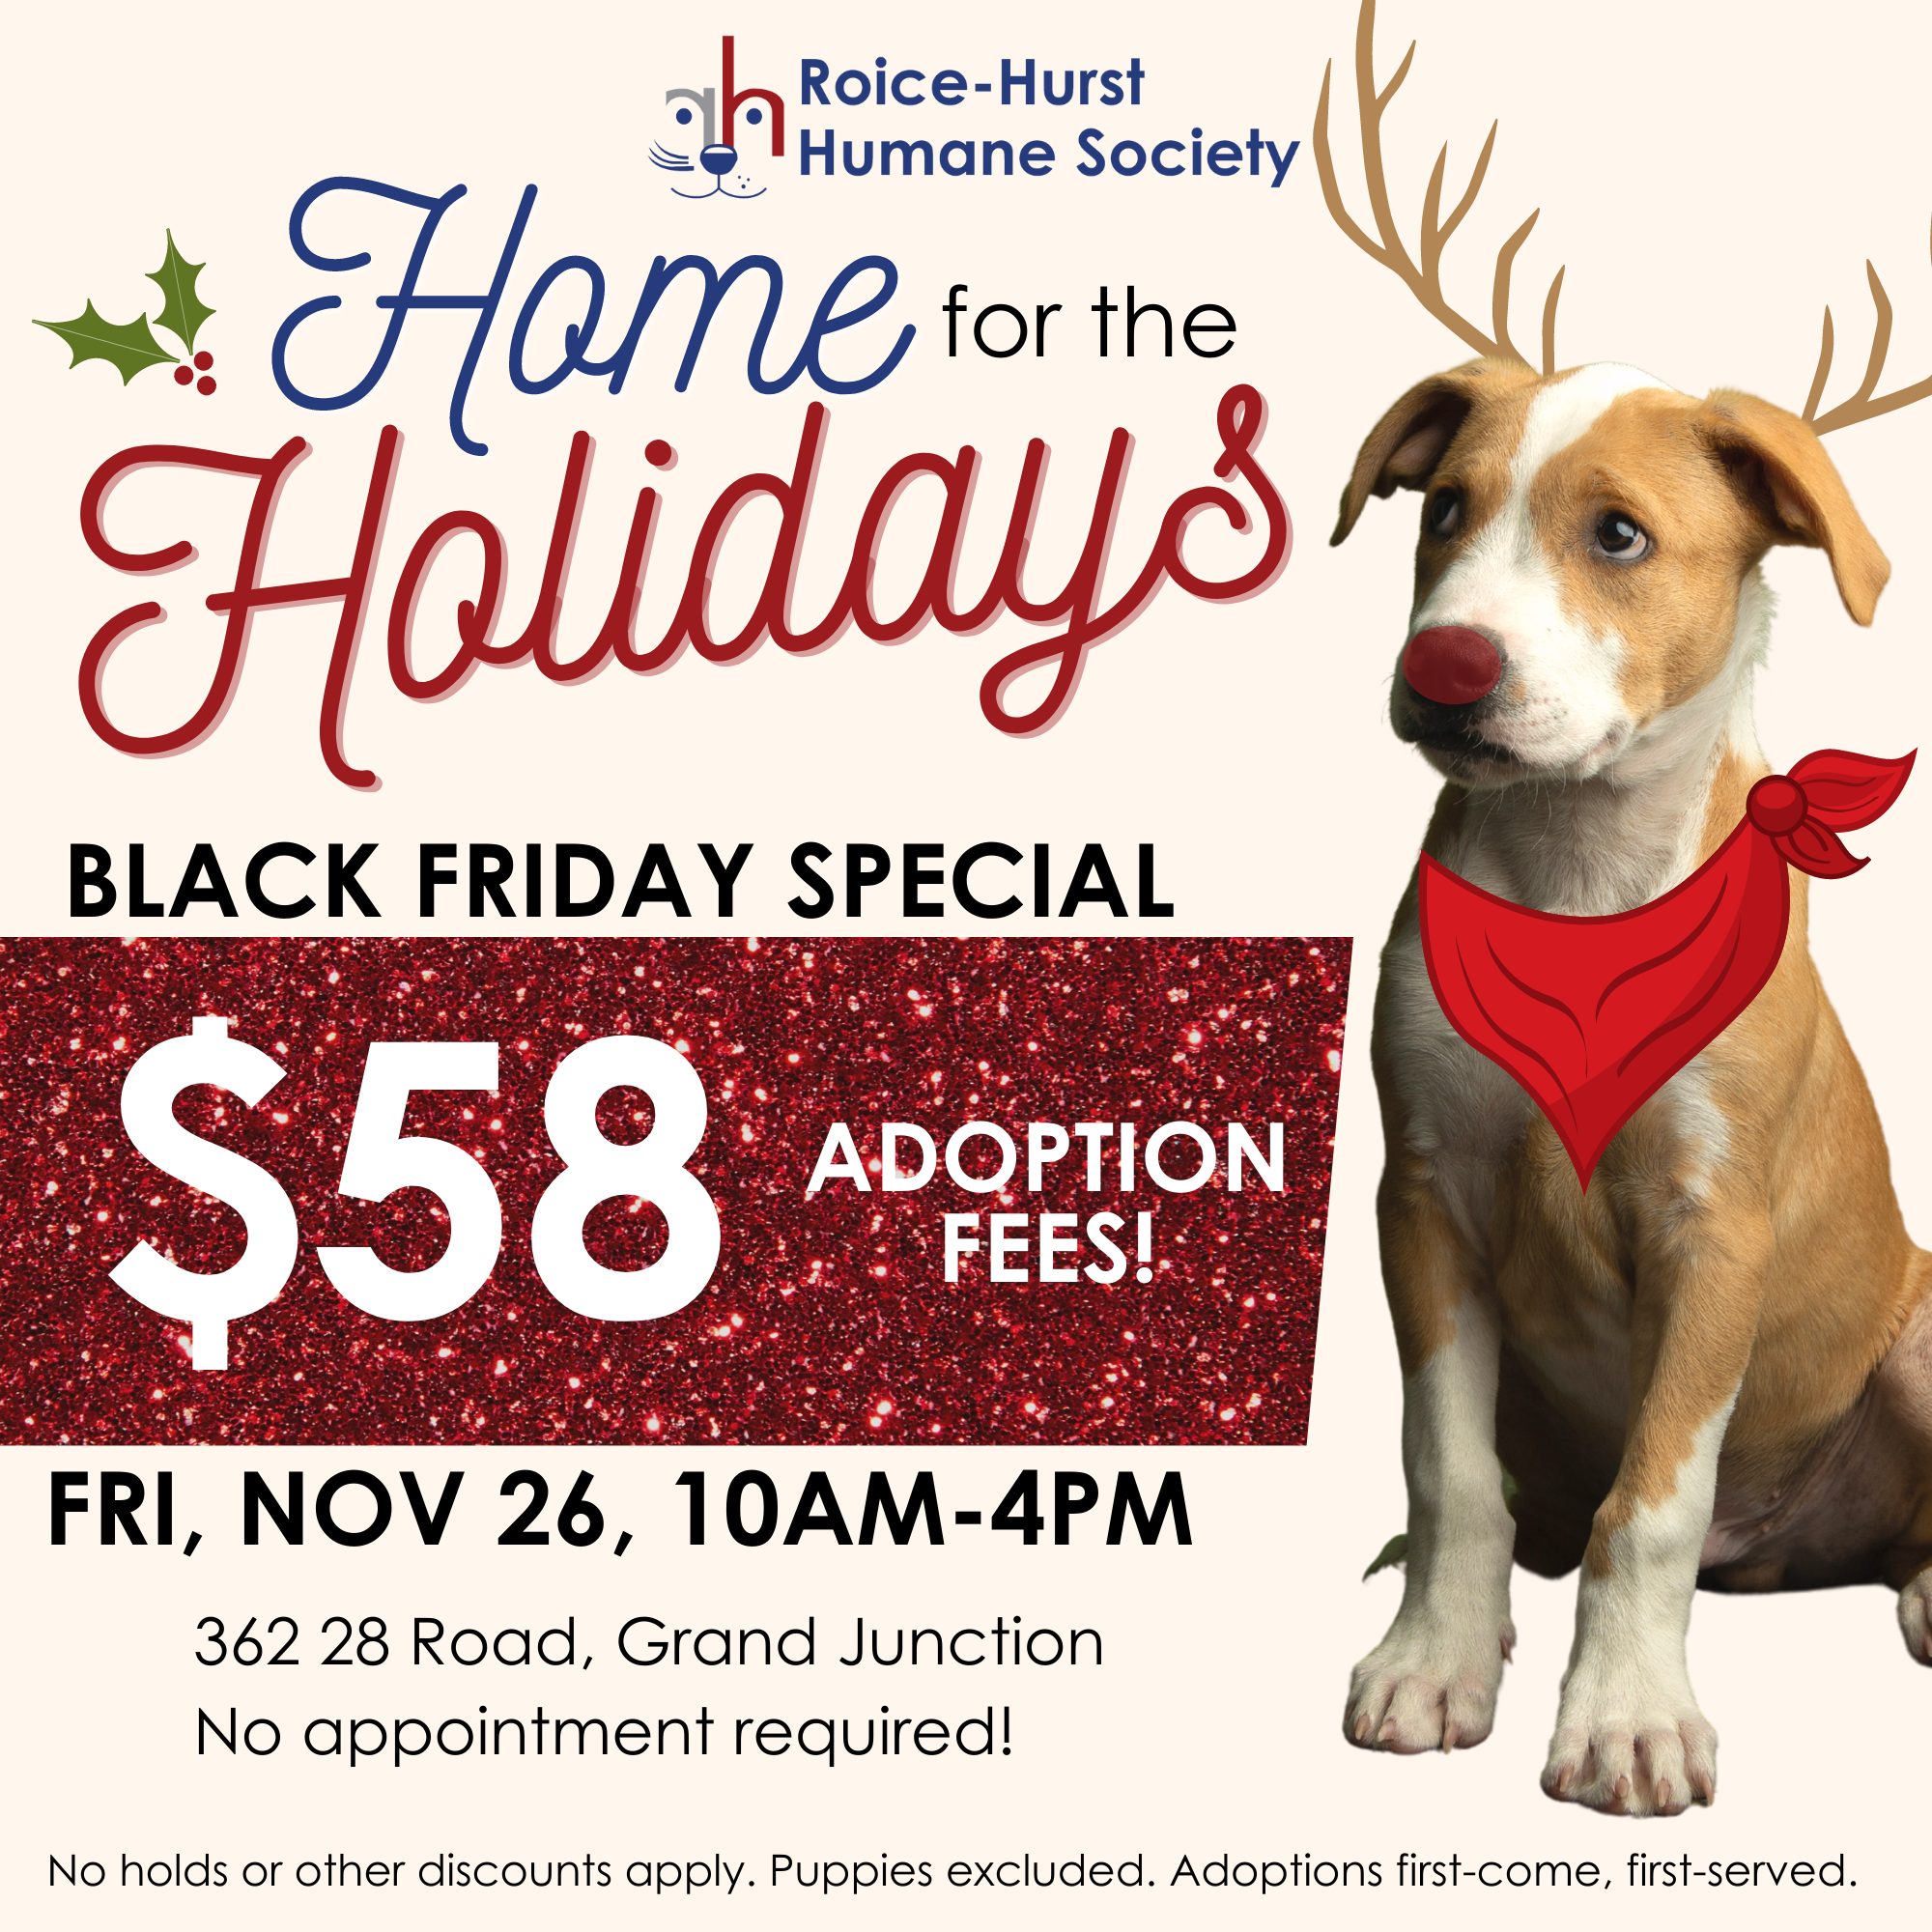 Home for the Holidays Black Friday Special